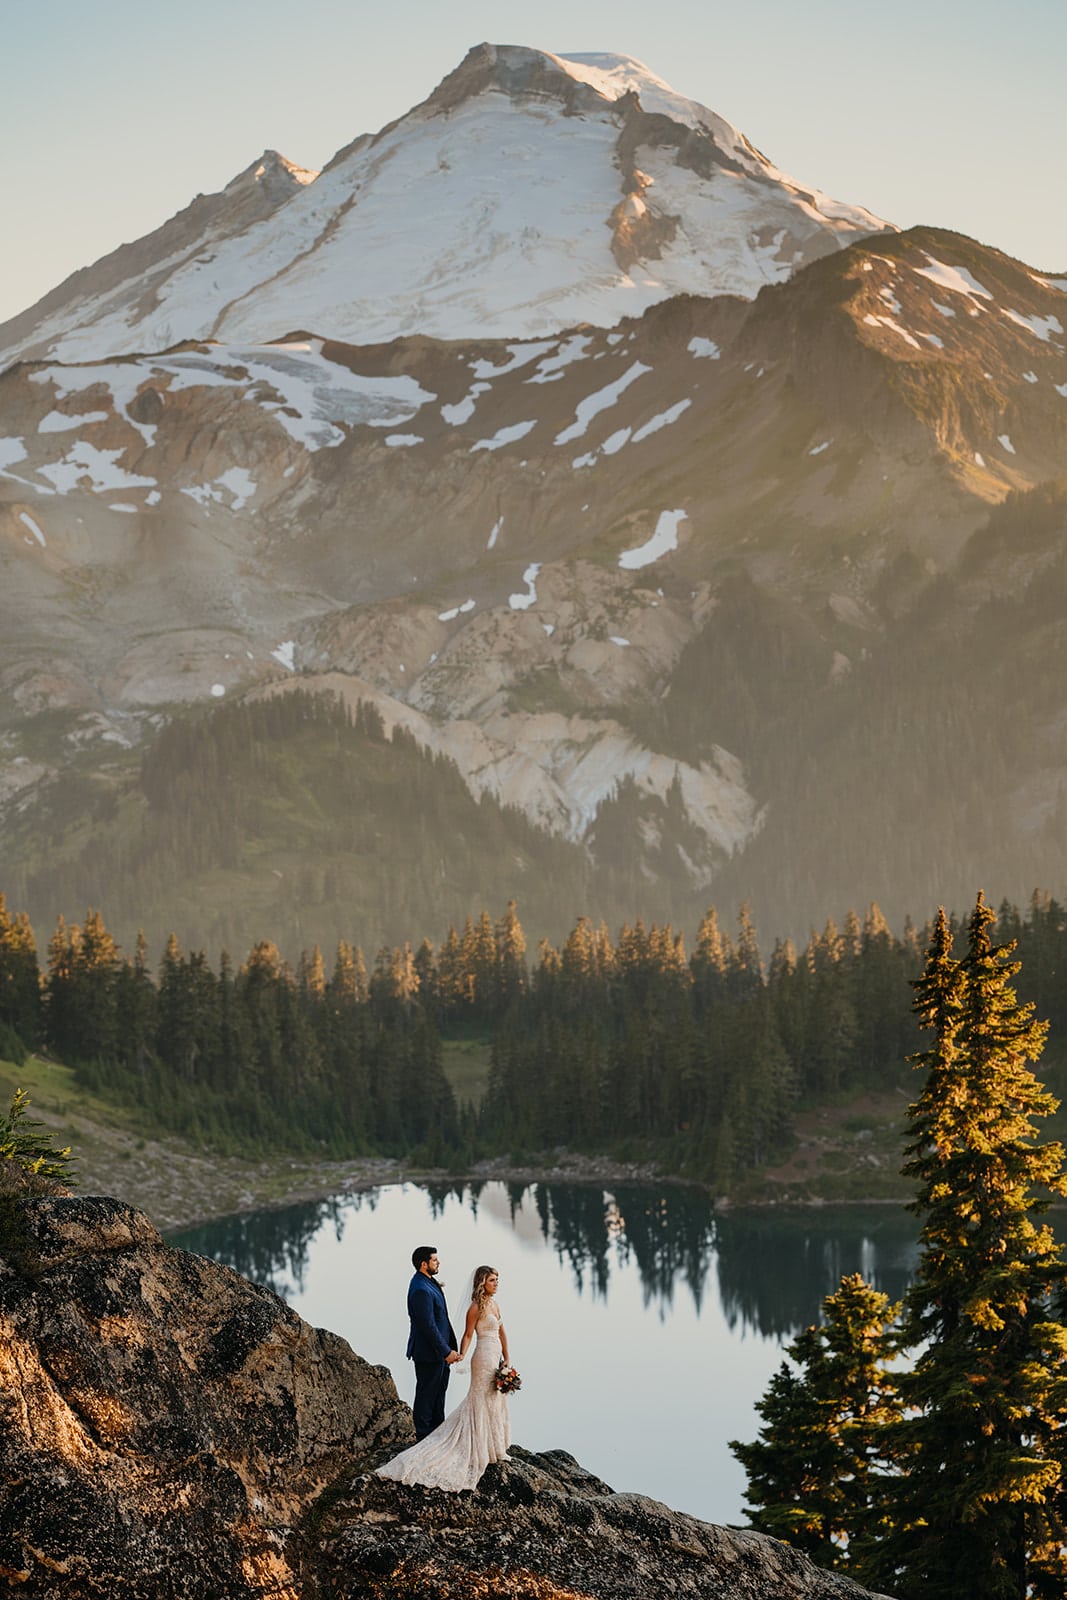 The couple stands for a portrait with Mt Baker.